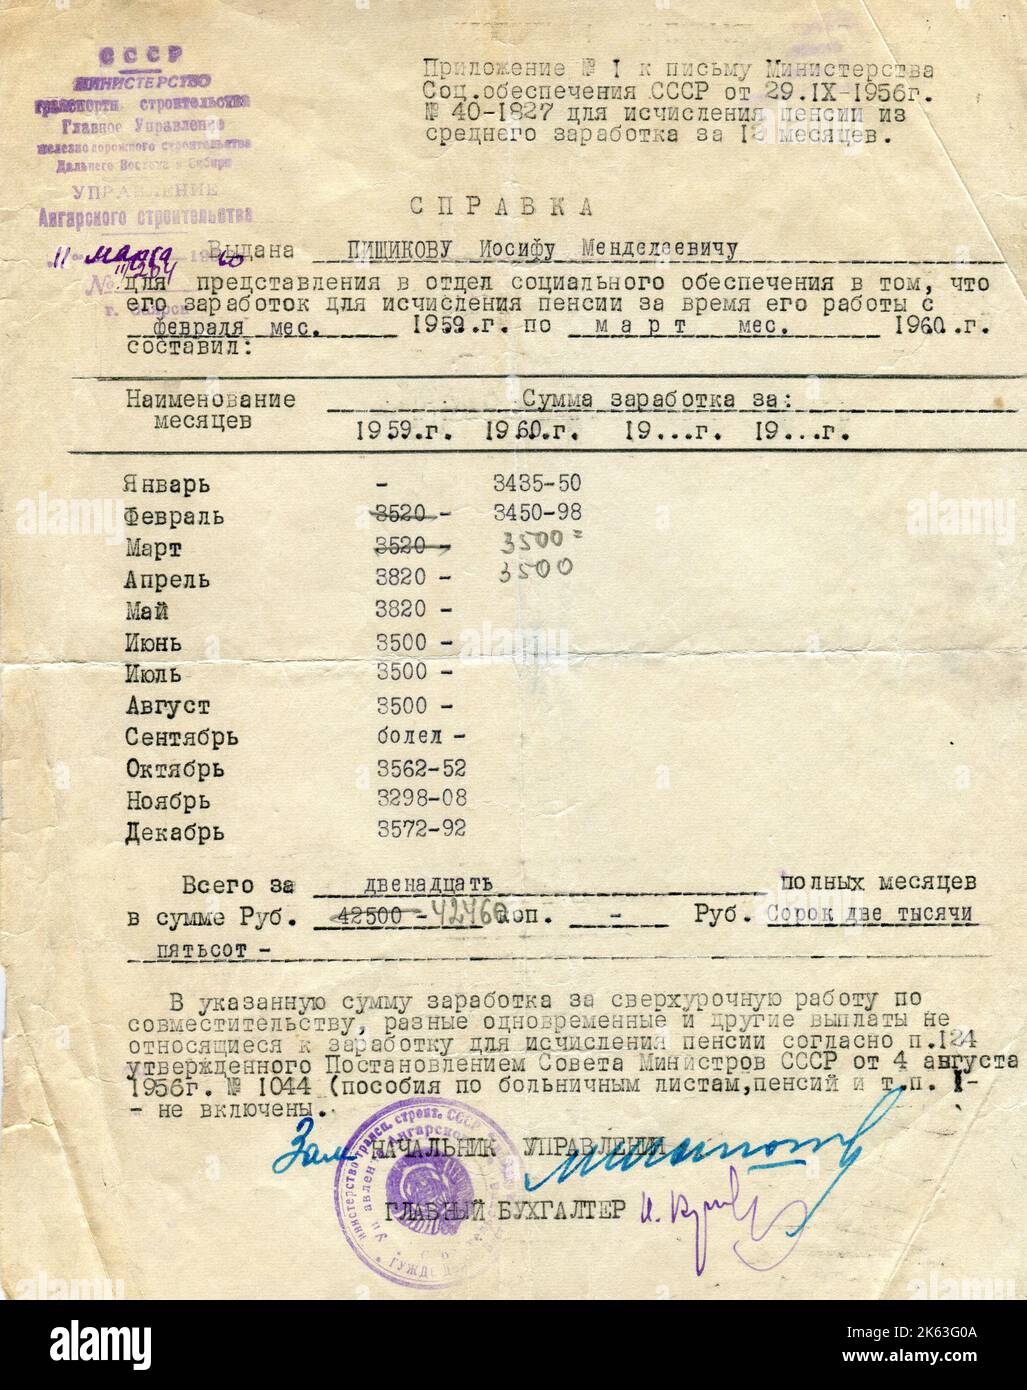 Archive of Pishchikov Iosif Mendeleevich (Russian: Пищиков Иосиф Менделеевич), born in 1905, a native of the town of Pochep, Oryol region. Jewish nationality, convicted by the Military Tribunal of the Kharkov Military District on August 11, 1937 under Articles 54-11,17-54-8 and 54-10 of the Criminal Code of the Ukrainian SSR to imprisonment for ten years. Angarsk Construction Department. Salary information. Stock Photo